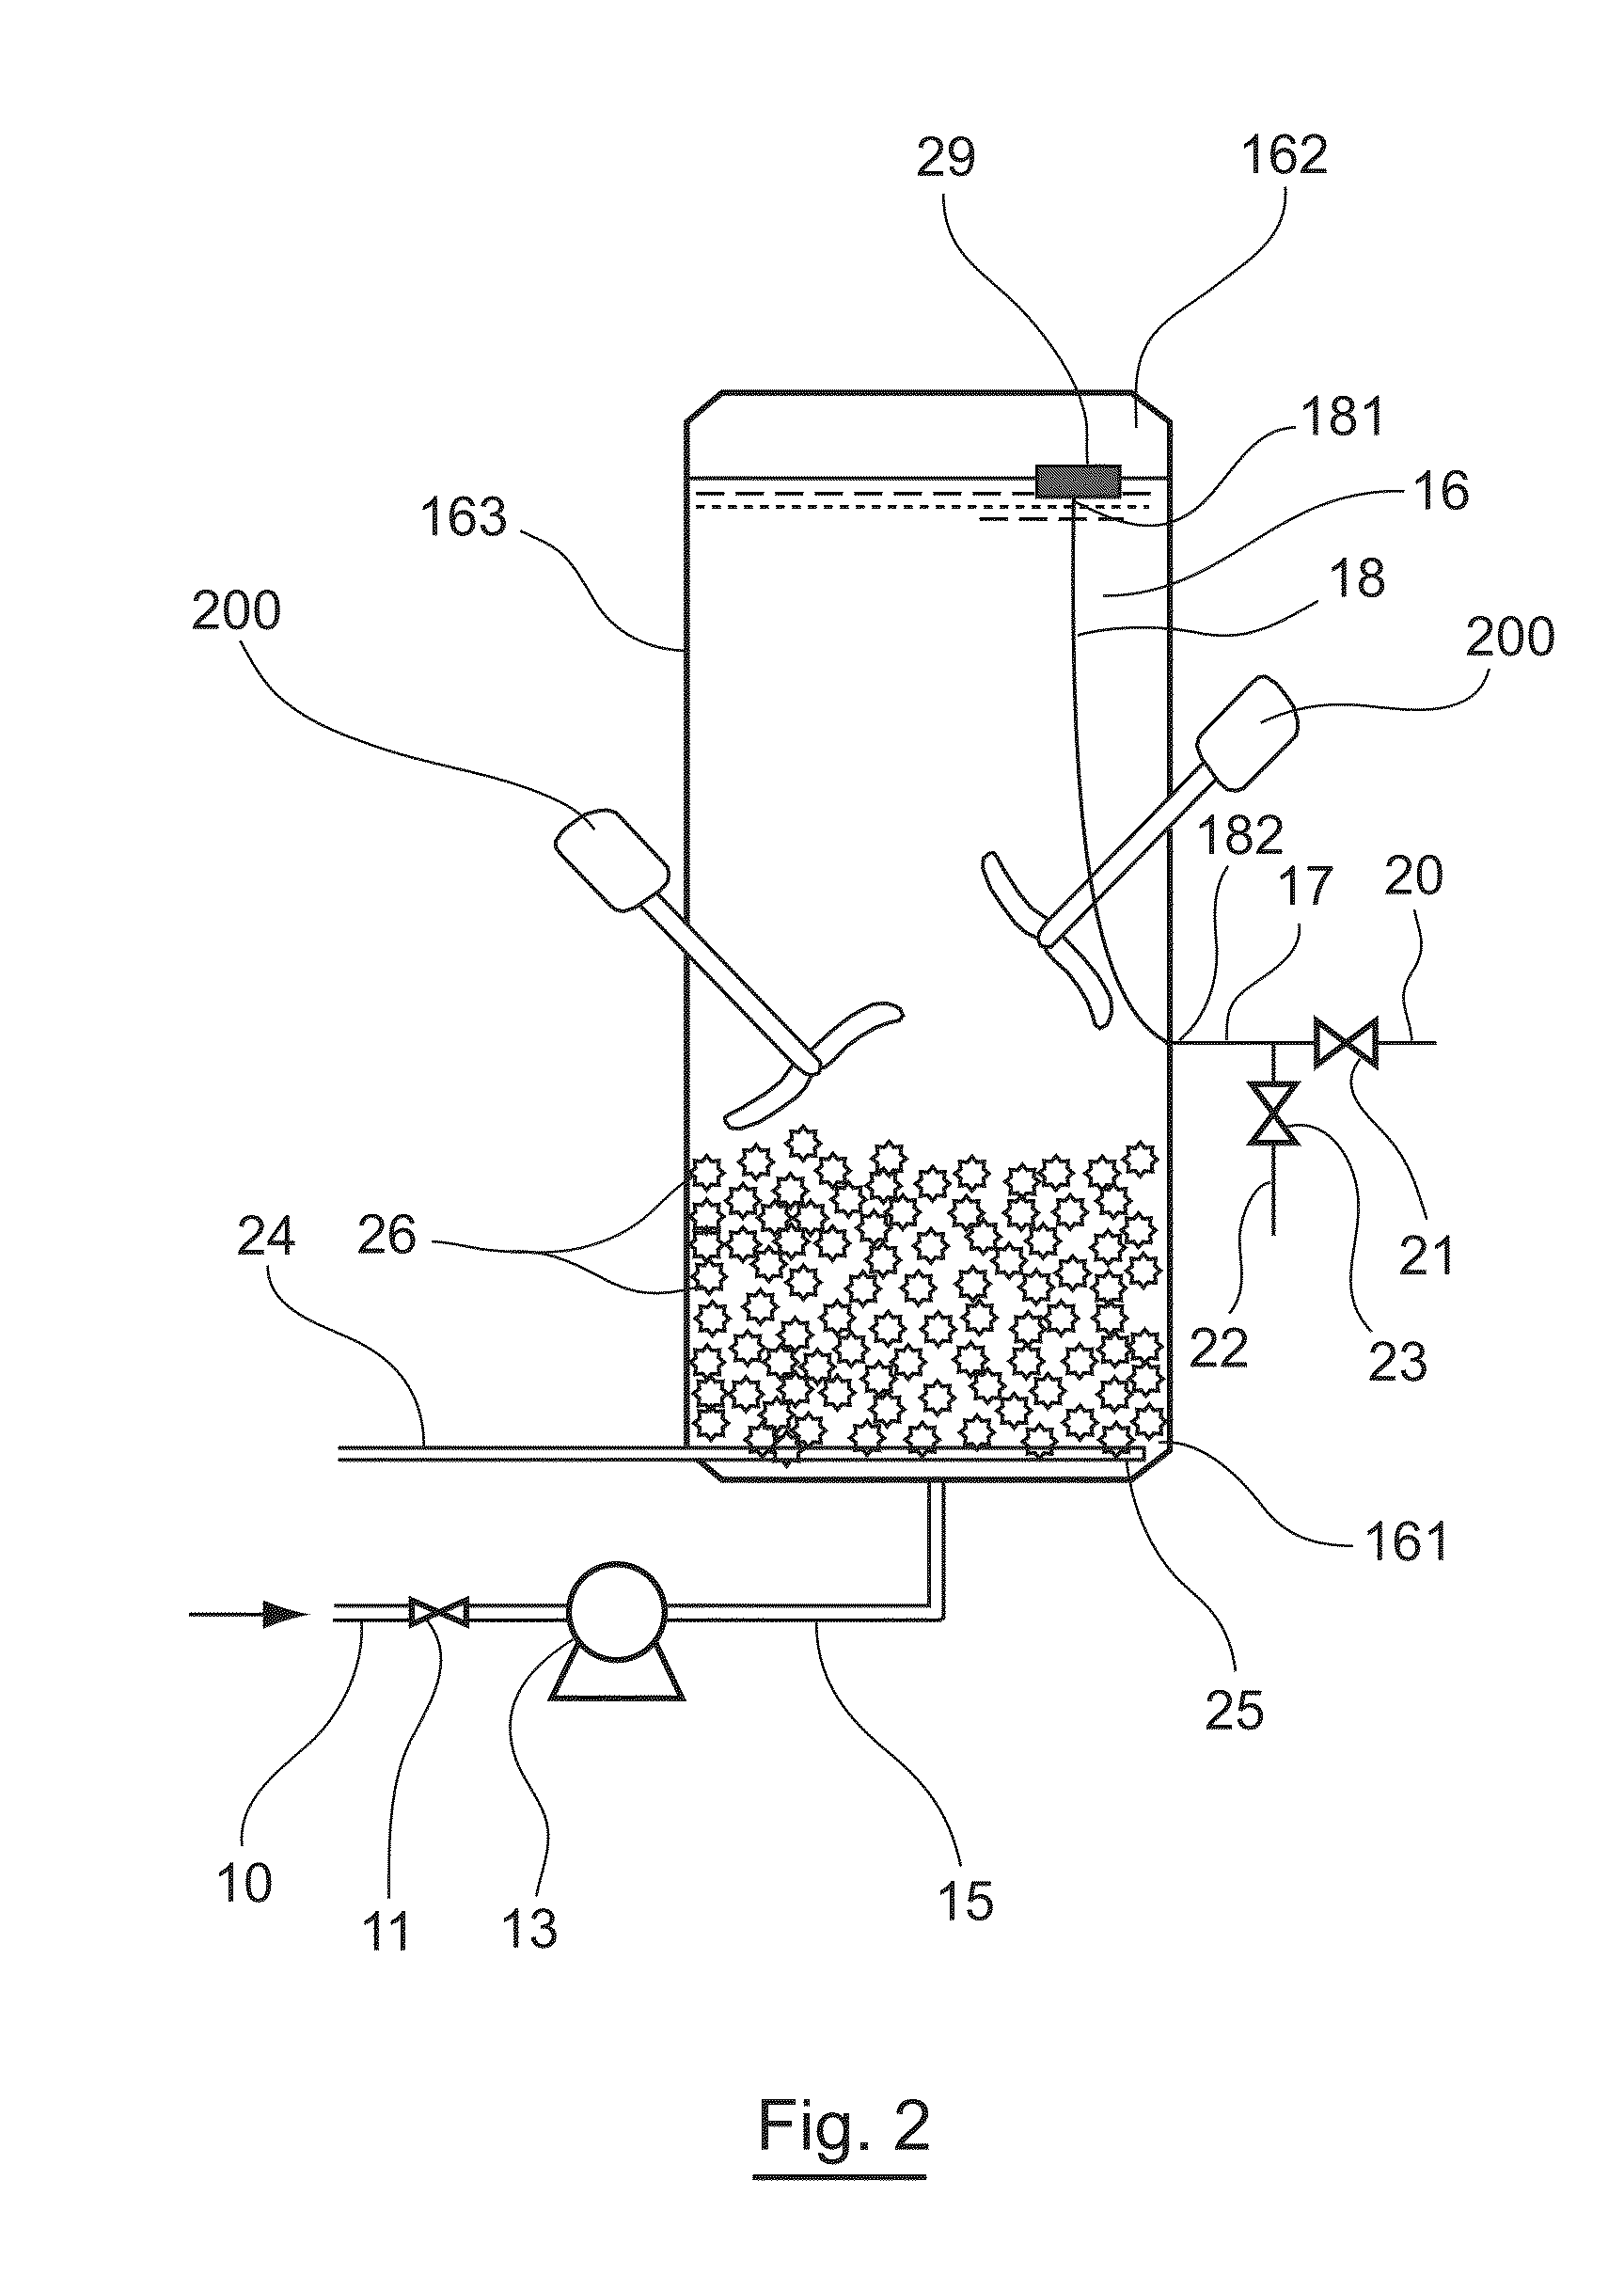 Method for the Sequenced Biological Treatment of Water Implementing Biomass Granules